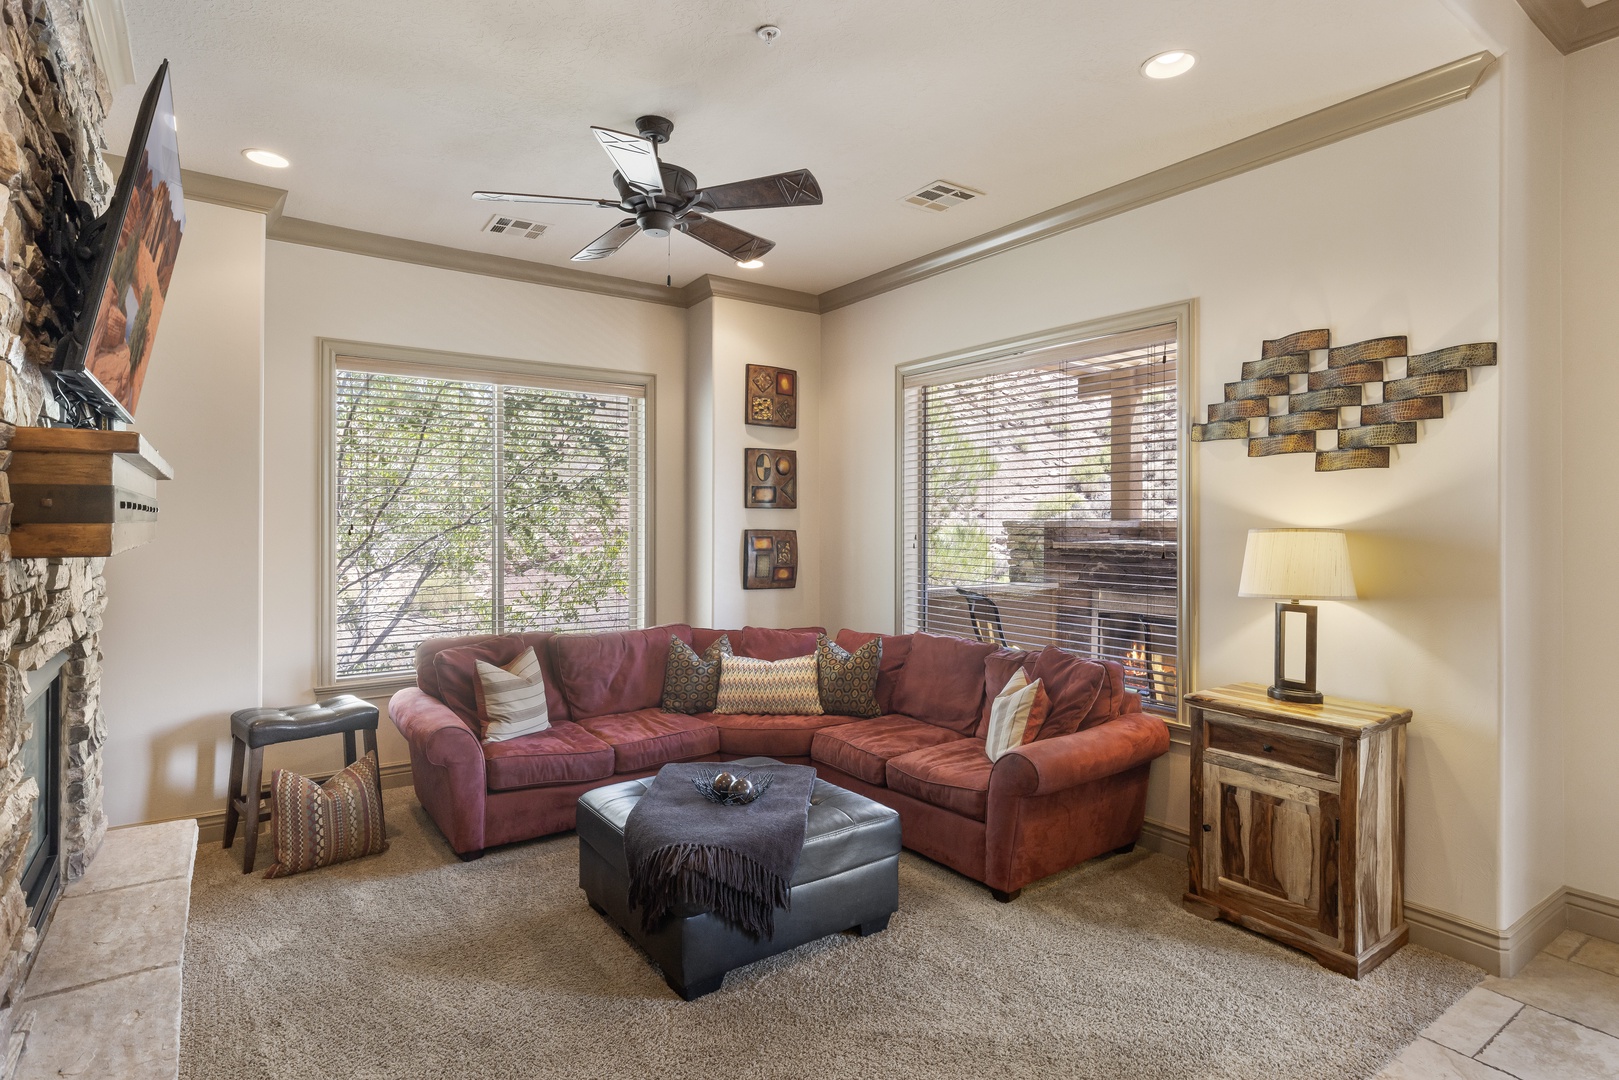 Comfortable seating in the living area